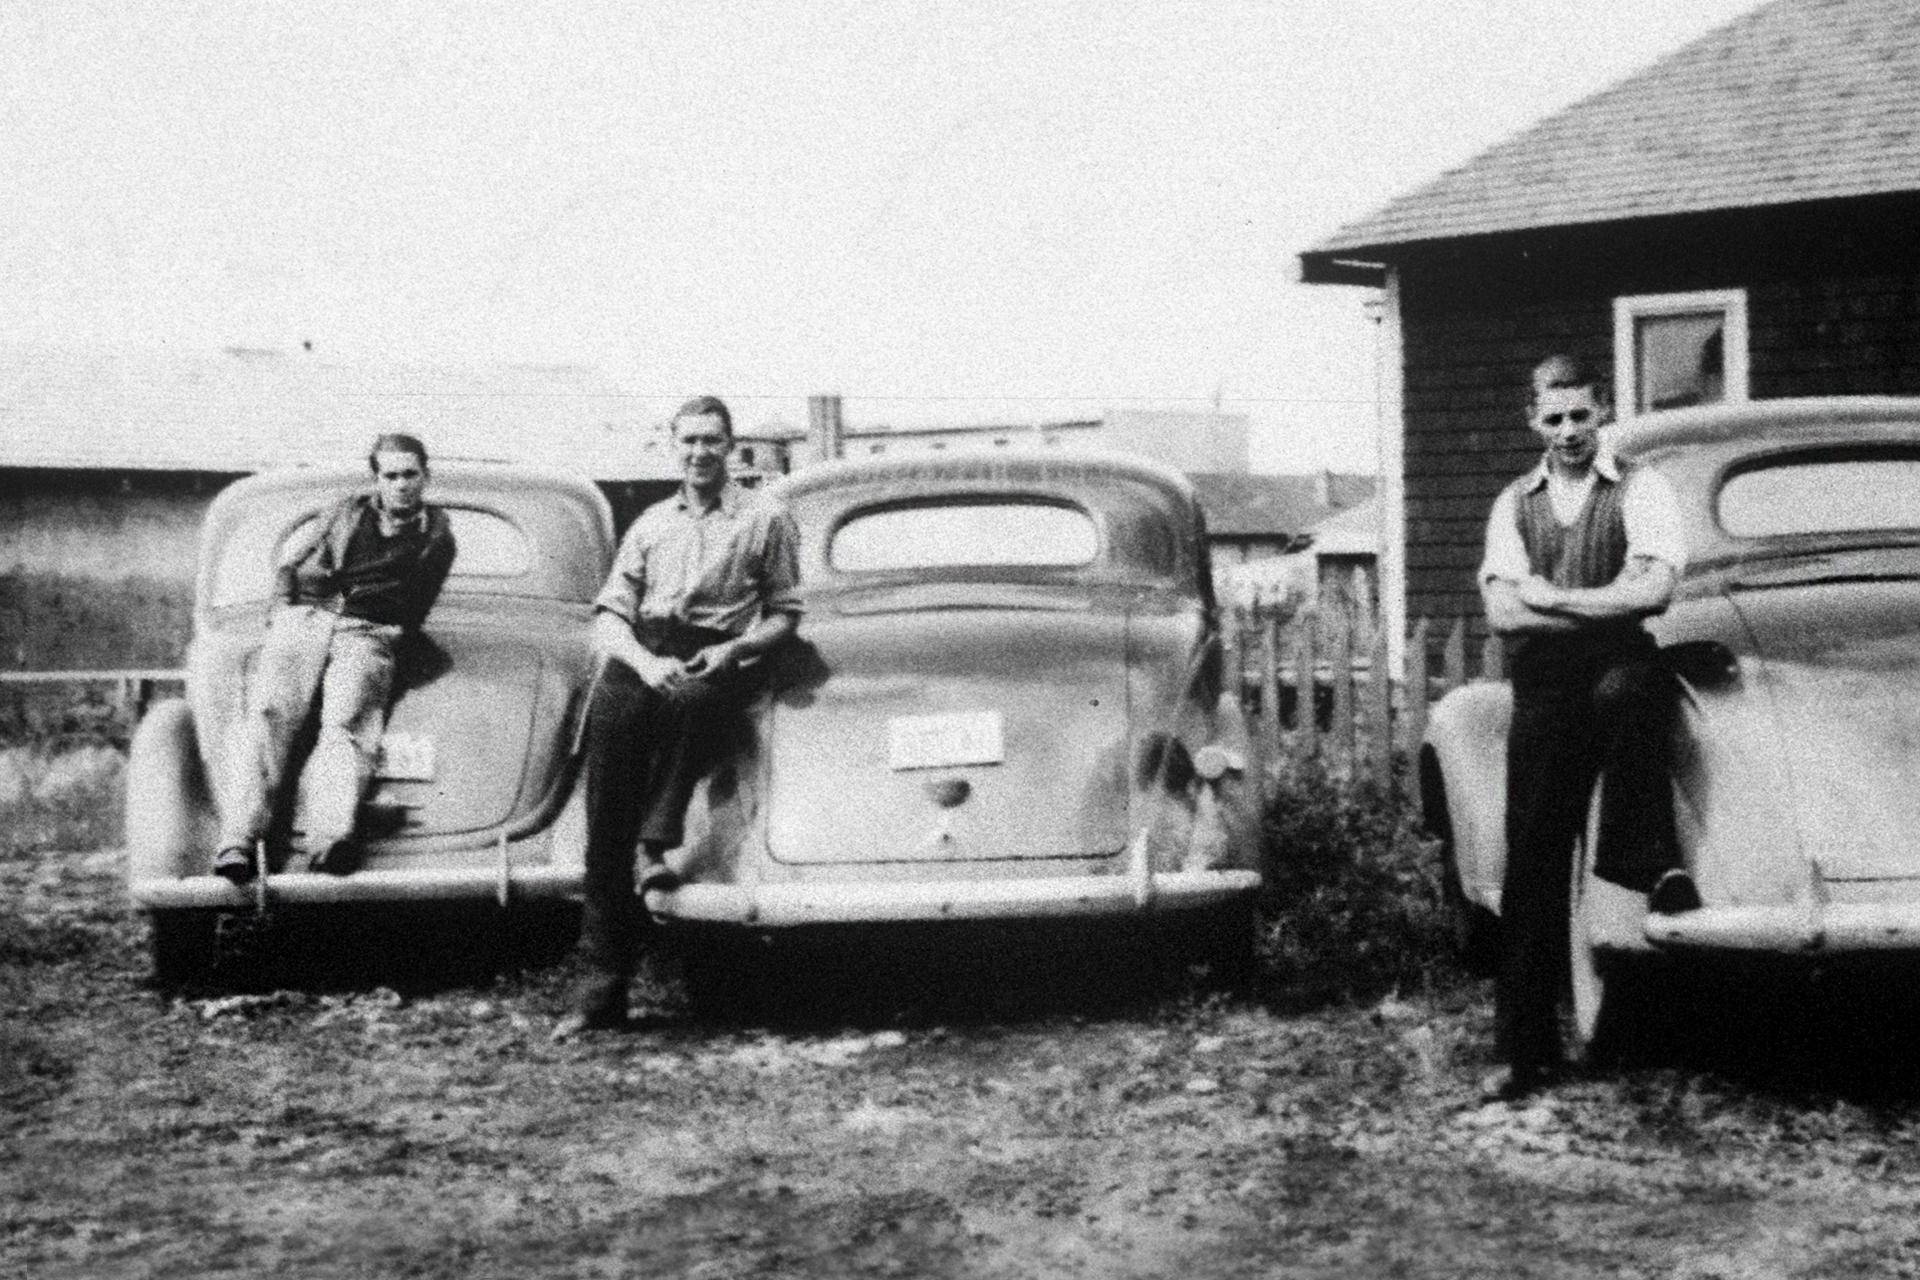 First inspectors posing with cars